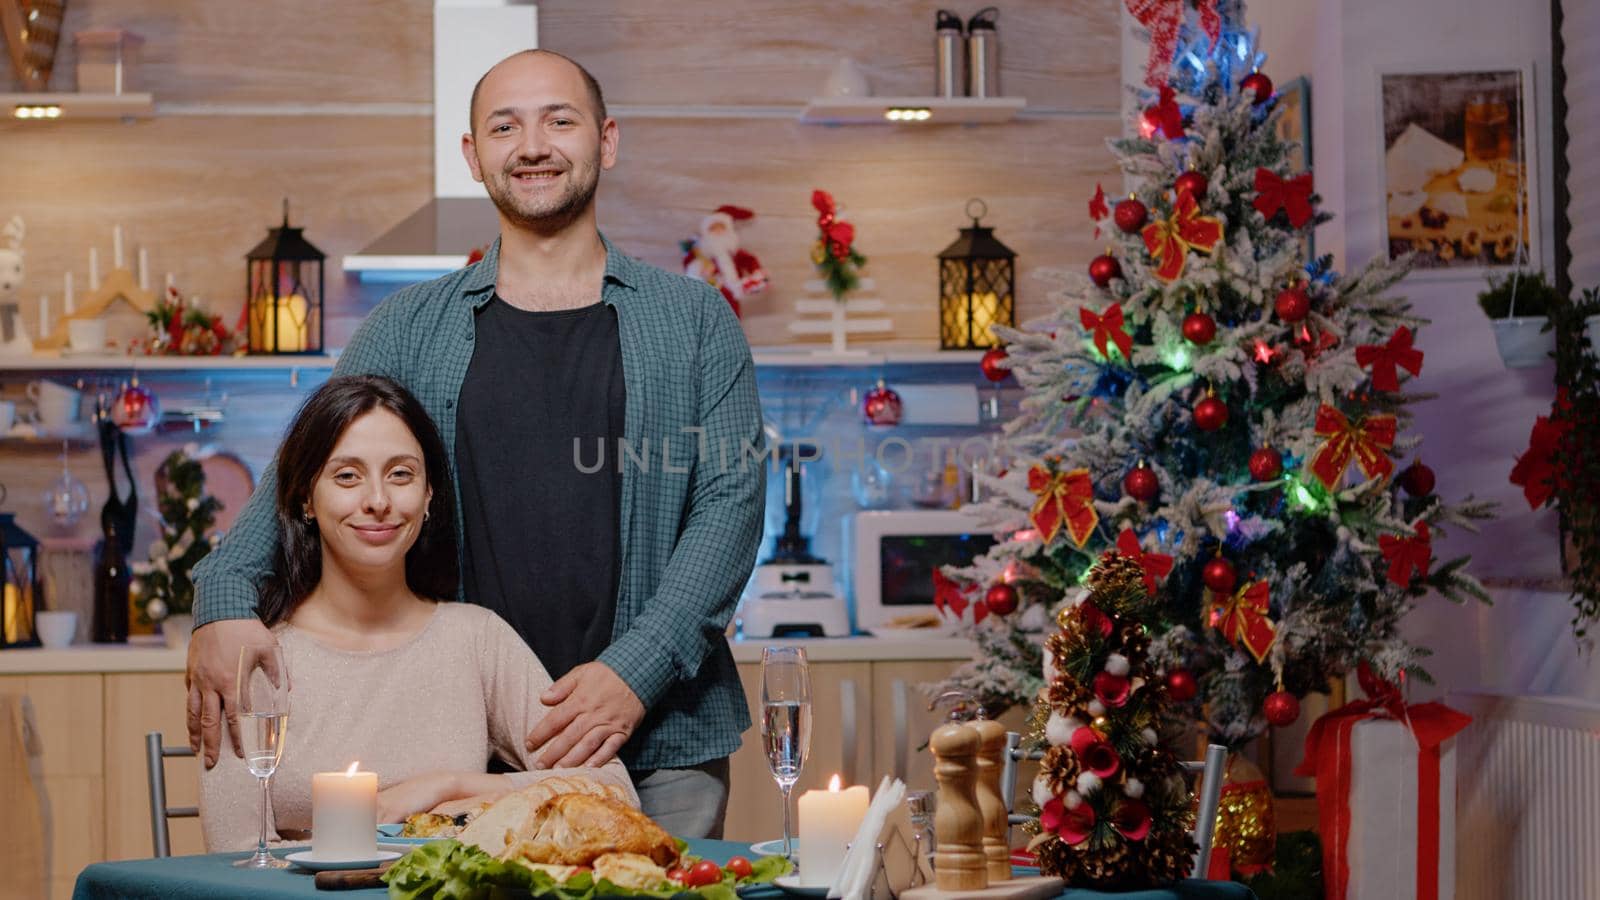 Portrait of couple at festive dinner on christmas eve. Man and woman looking at camera while enjoying holiday meal and celebration, sitting together and feeling cheerful for winter festivity